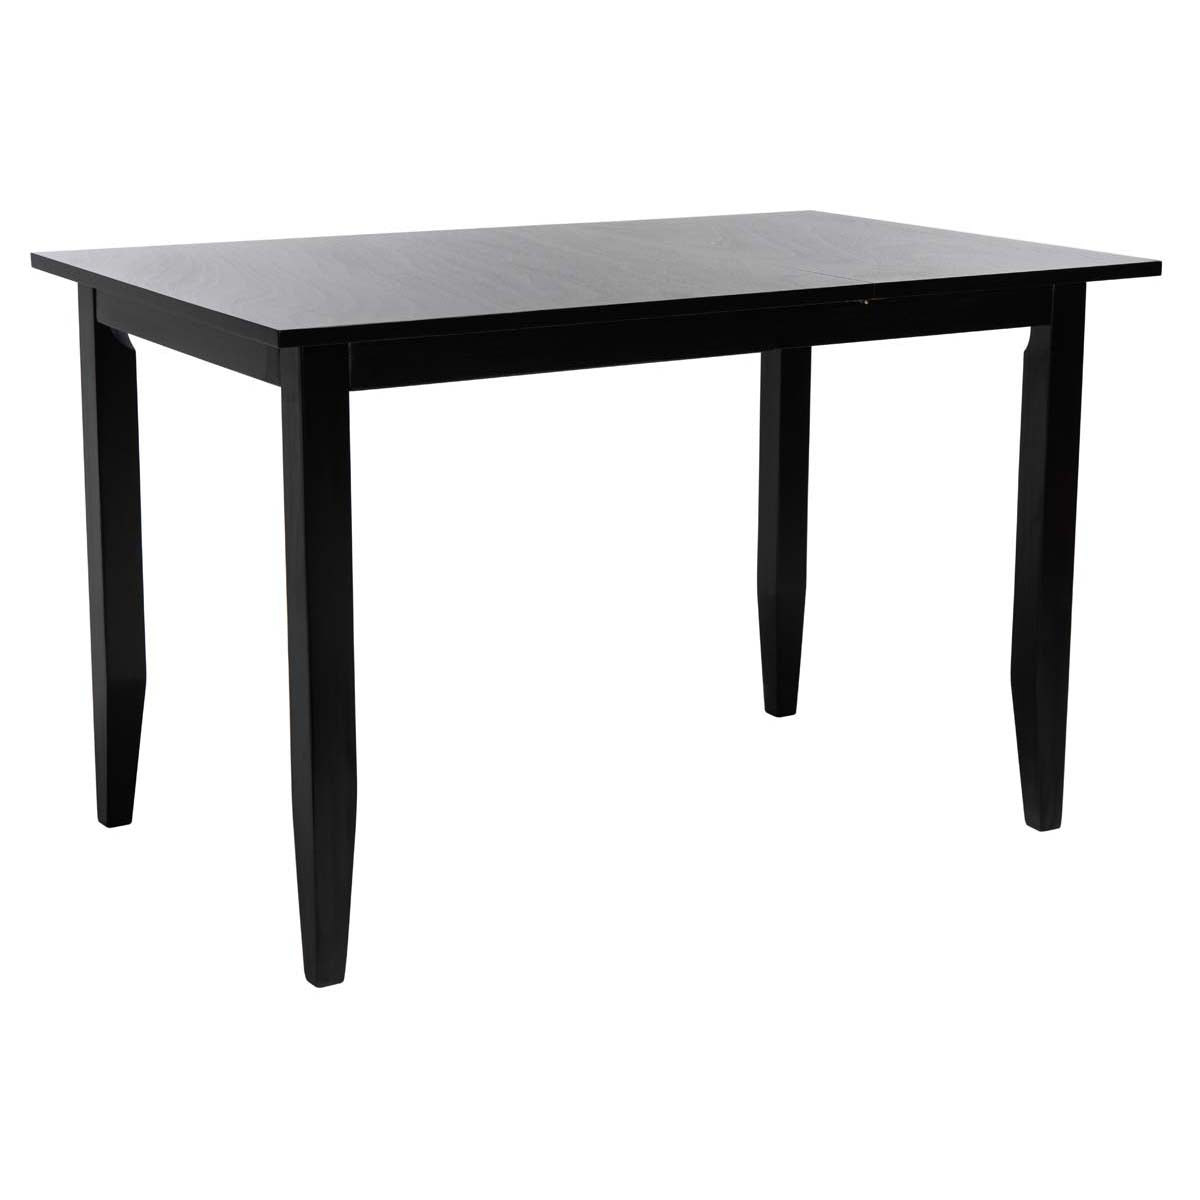 Safavieh Miliano Extension Table , DTB1404